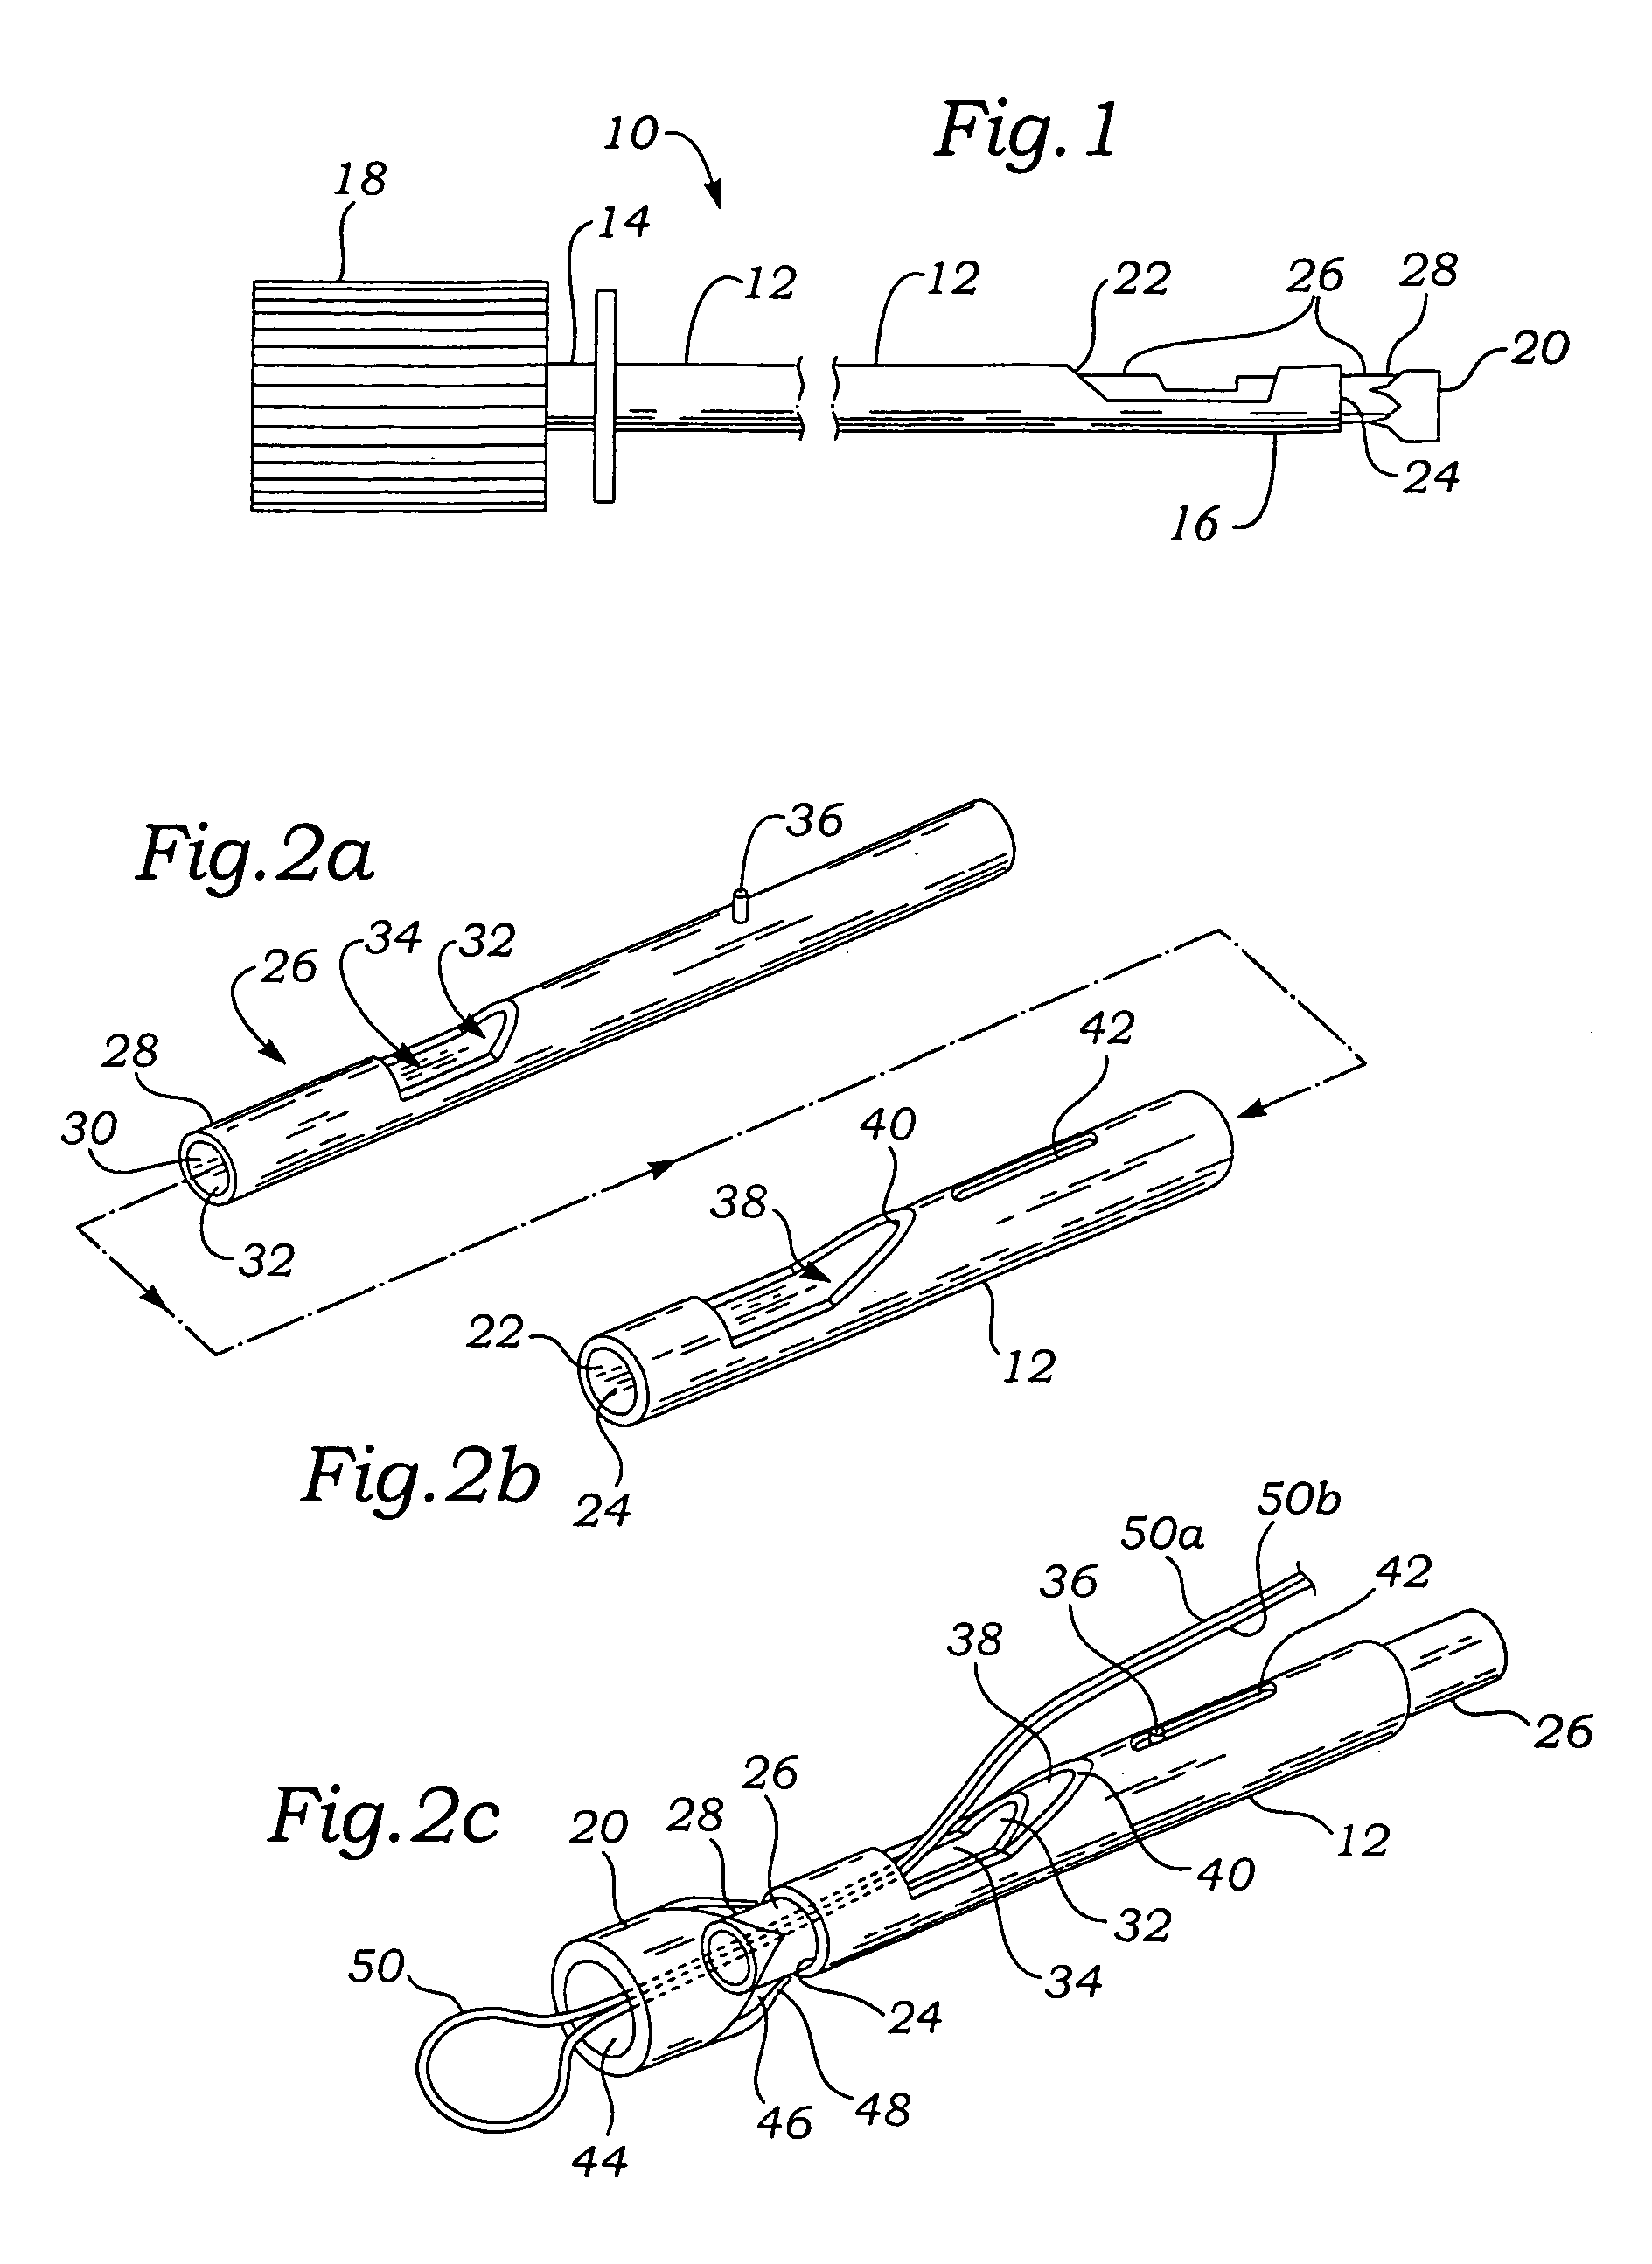 System, apparatus, and method for fastening tissue